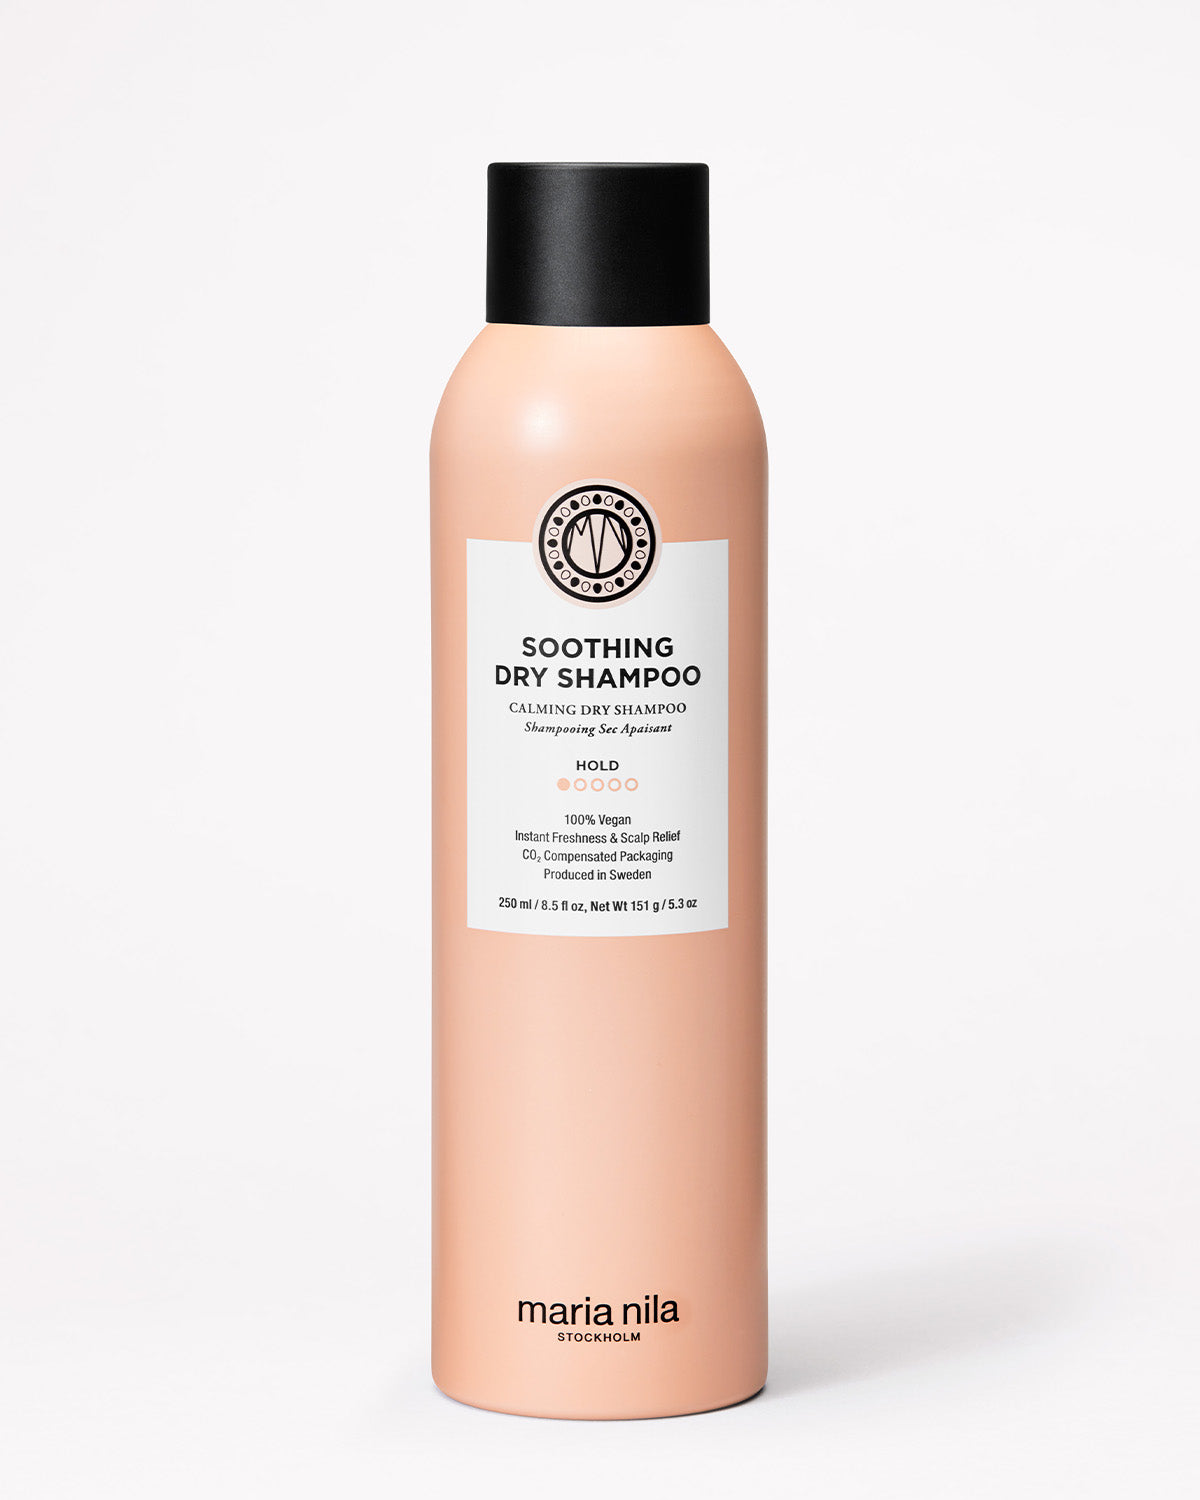 Soothing Dry Shampoo